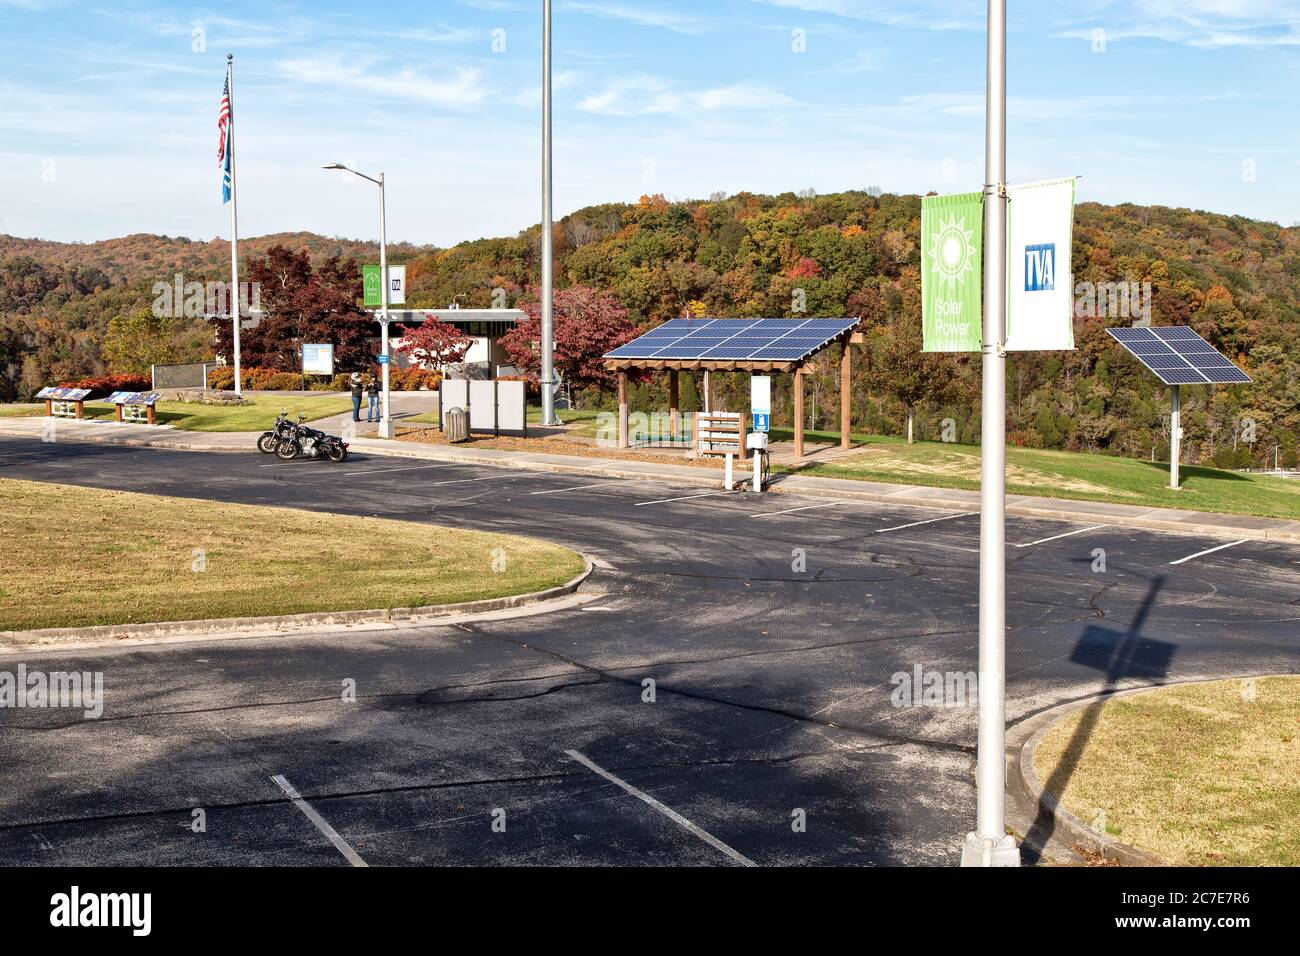 Melton Hill Reservoir rest area, demonstration project, motorcycles & visitors, electric vehicle charging station, solar cells. Stock Photo